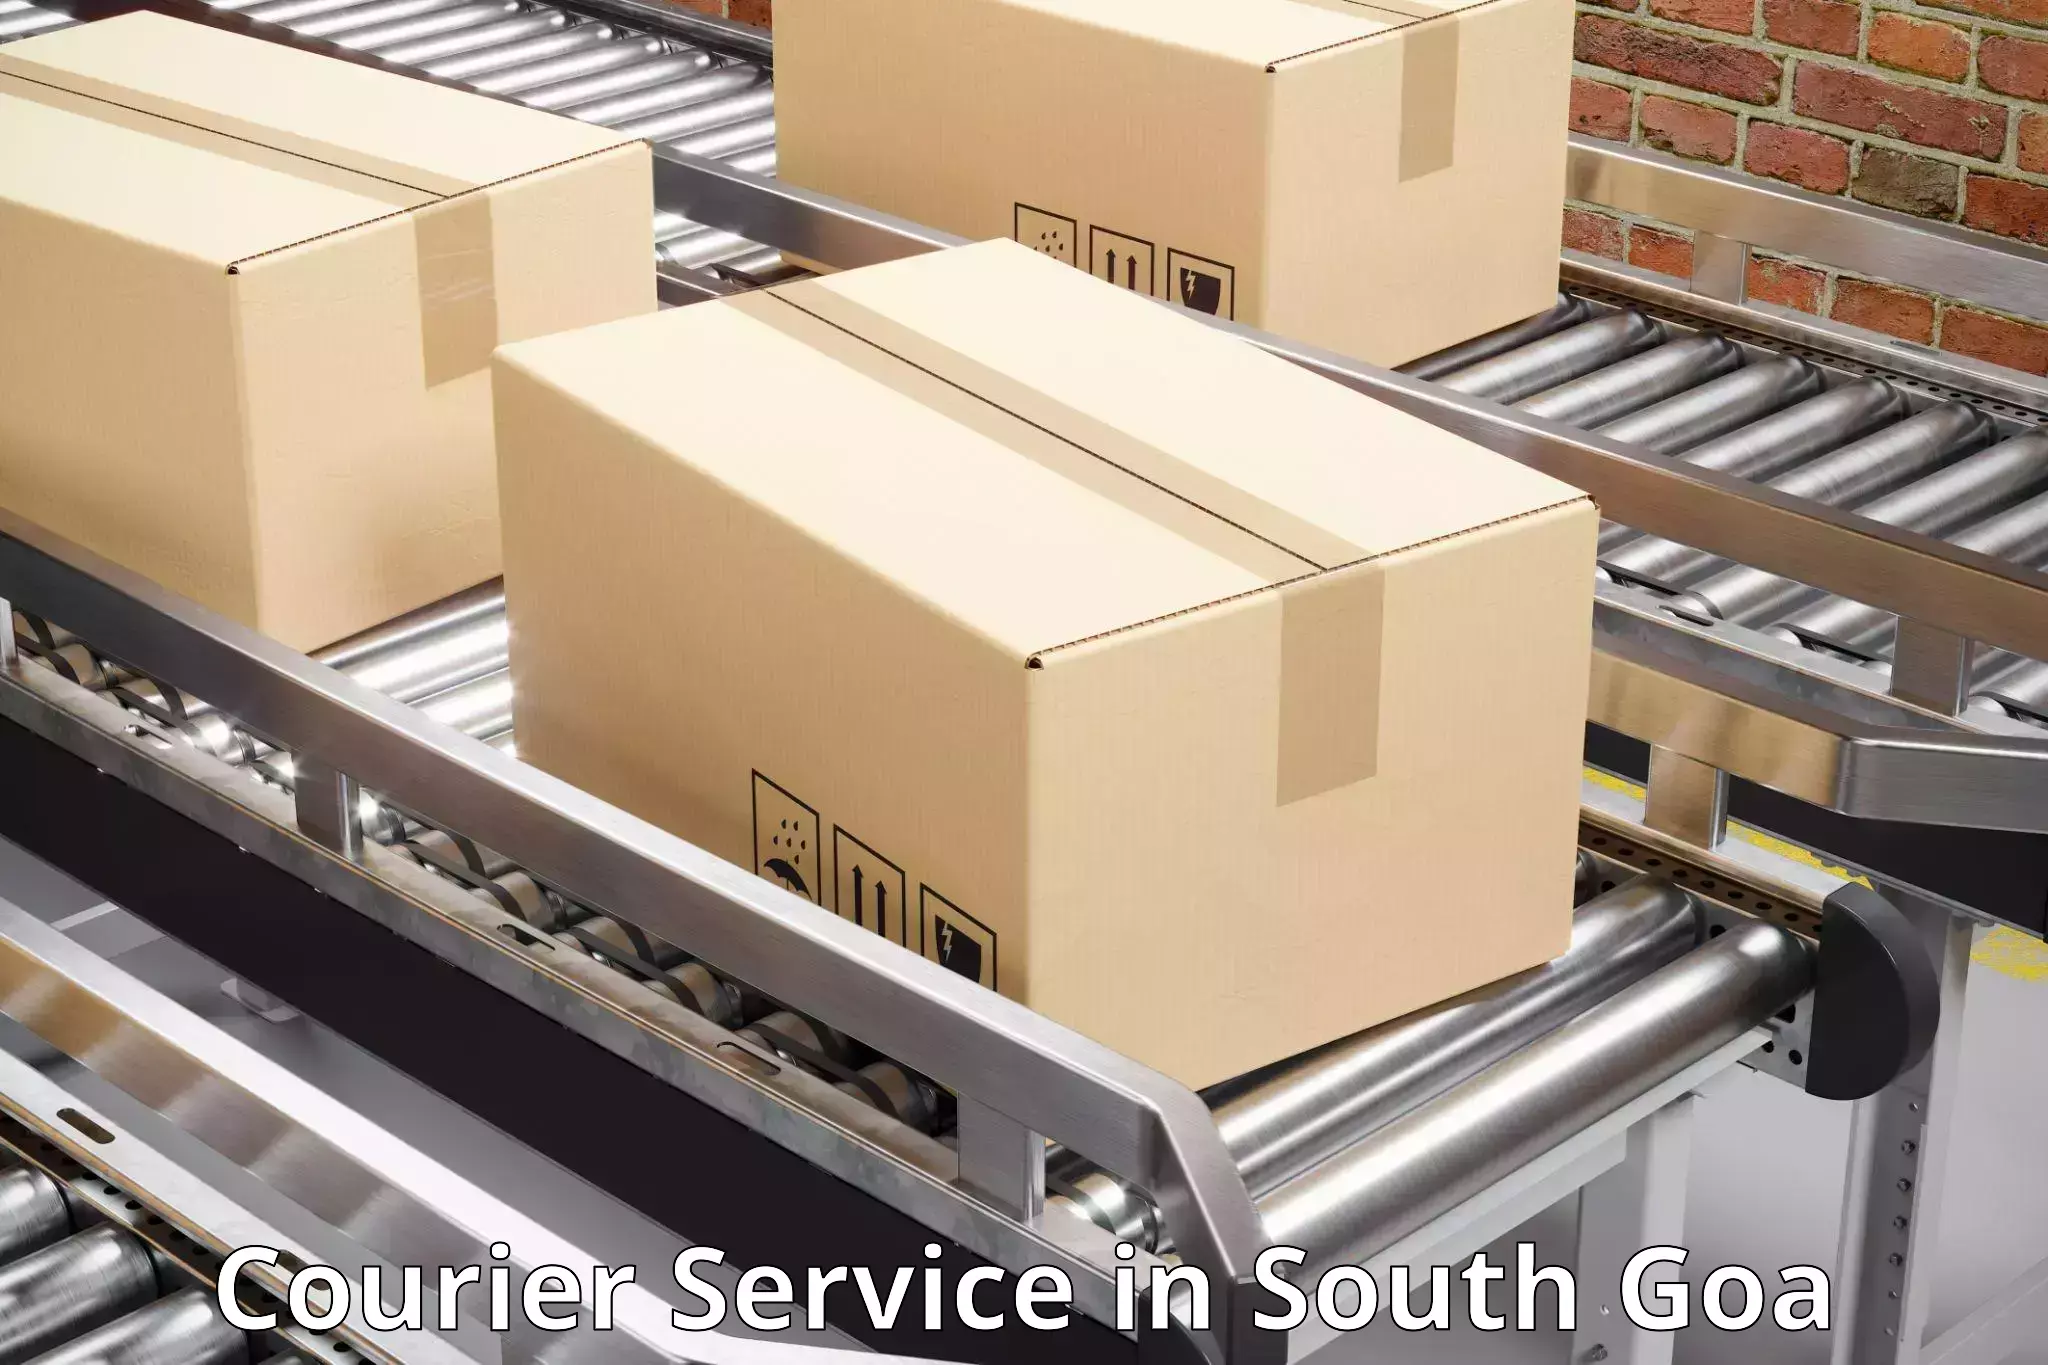 Efficient courier operations in South Goa